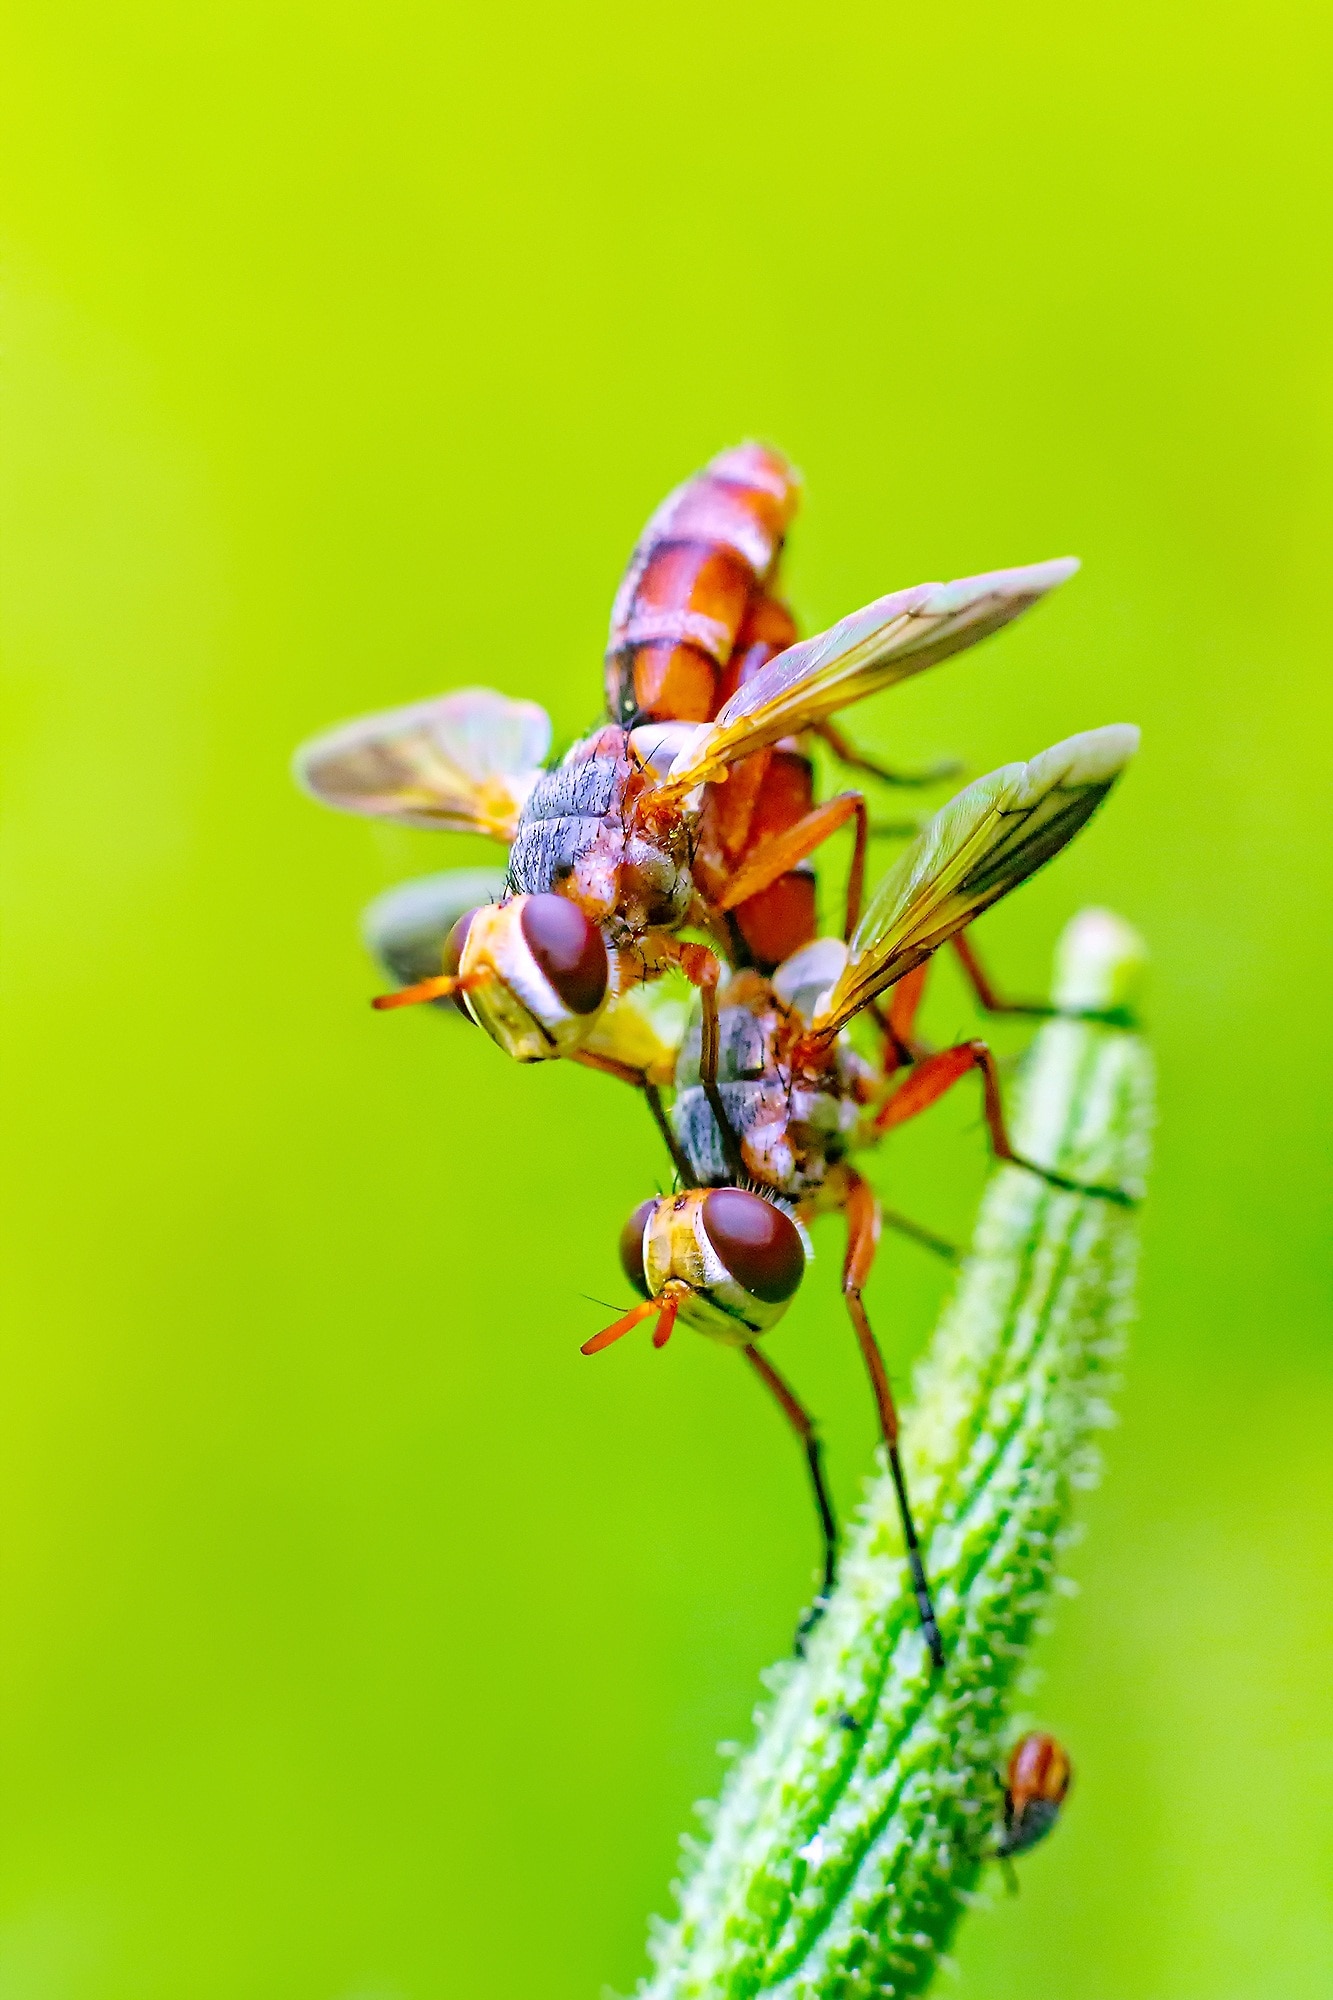 red and brown wasp on green stem